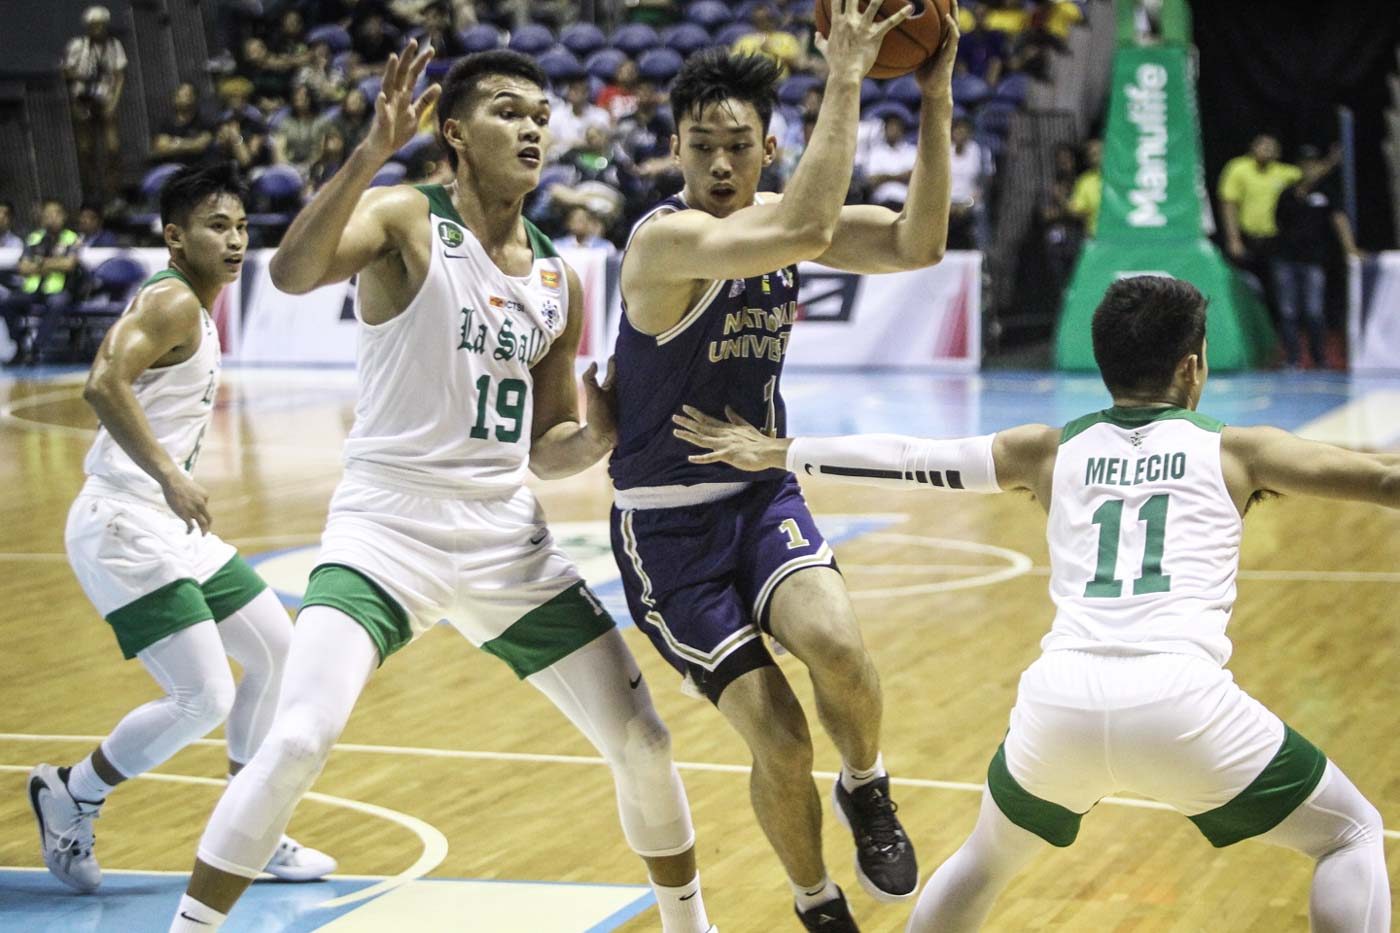 Baltazar, Malonzo tower over NU as La Salle completes escape act